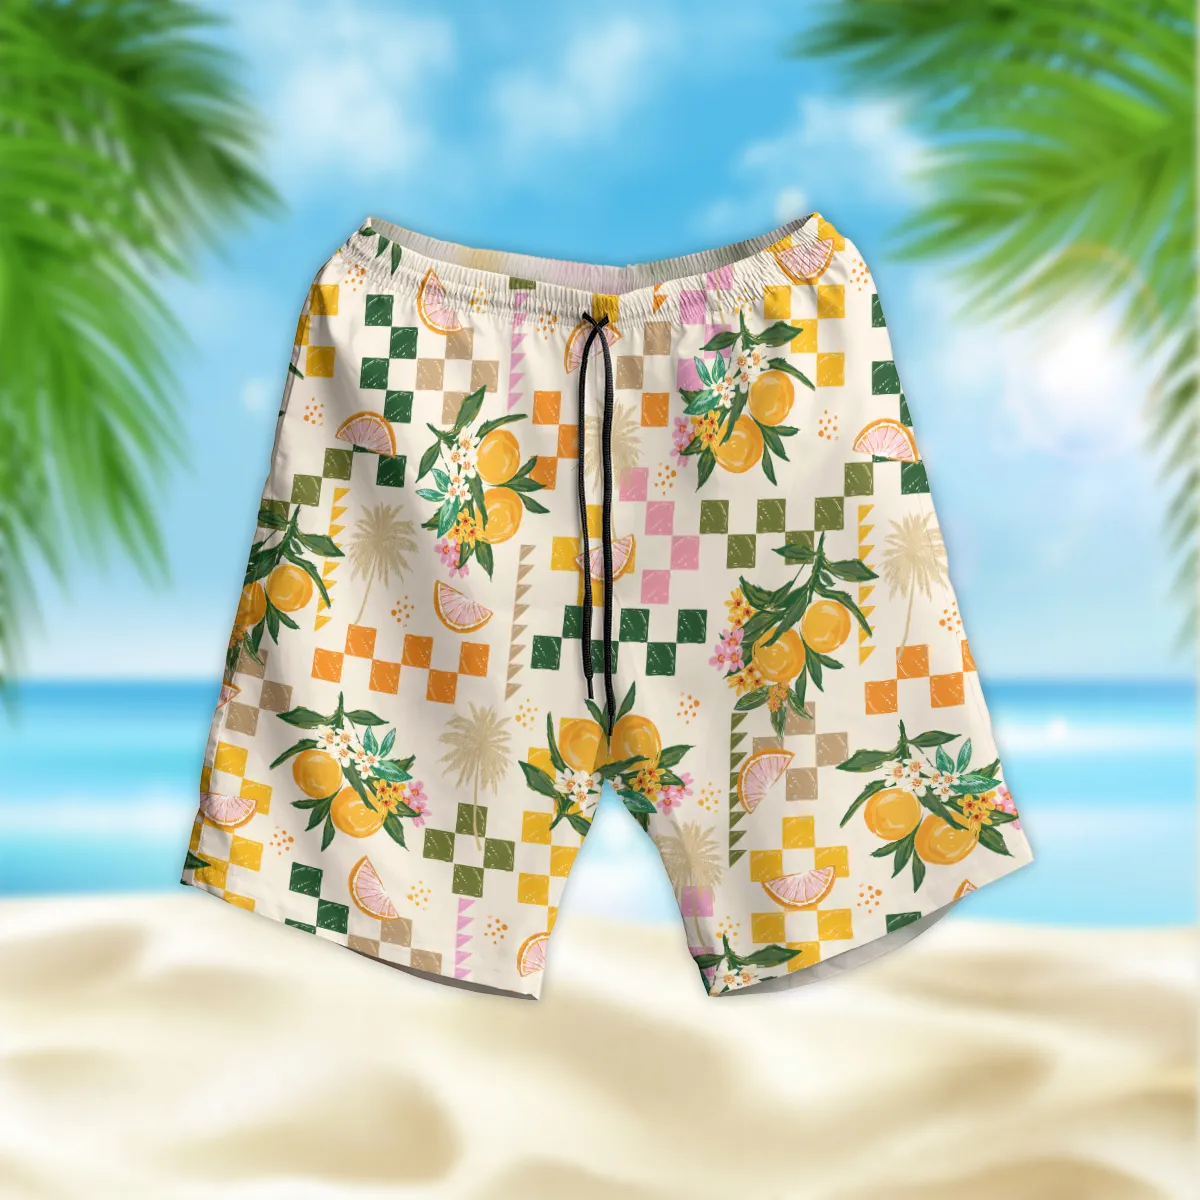 Bud Light Cheers to Summer Beer Lovers Beach Short All Over Prints Gift Loves